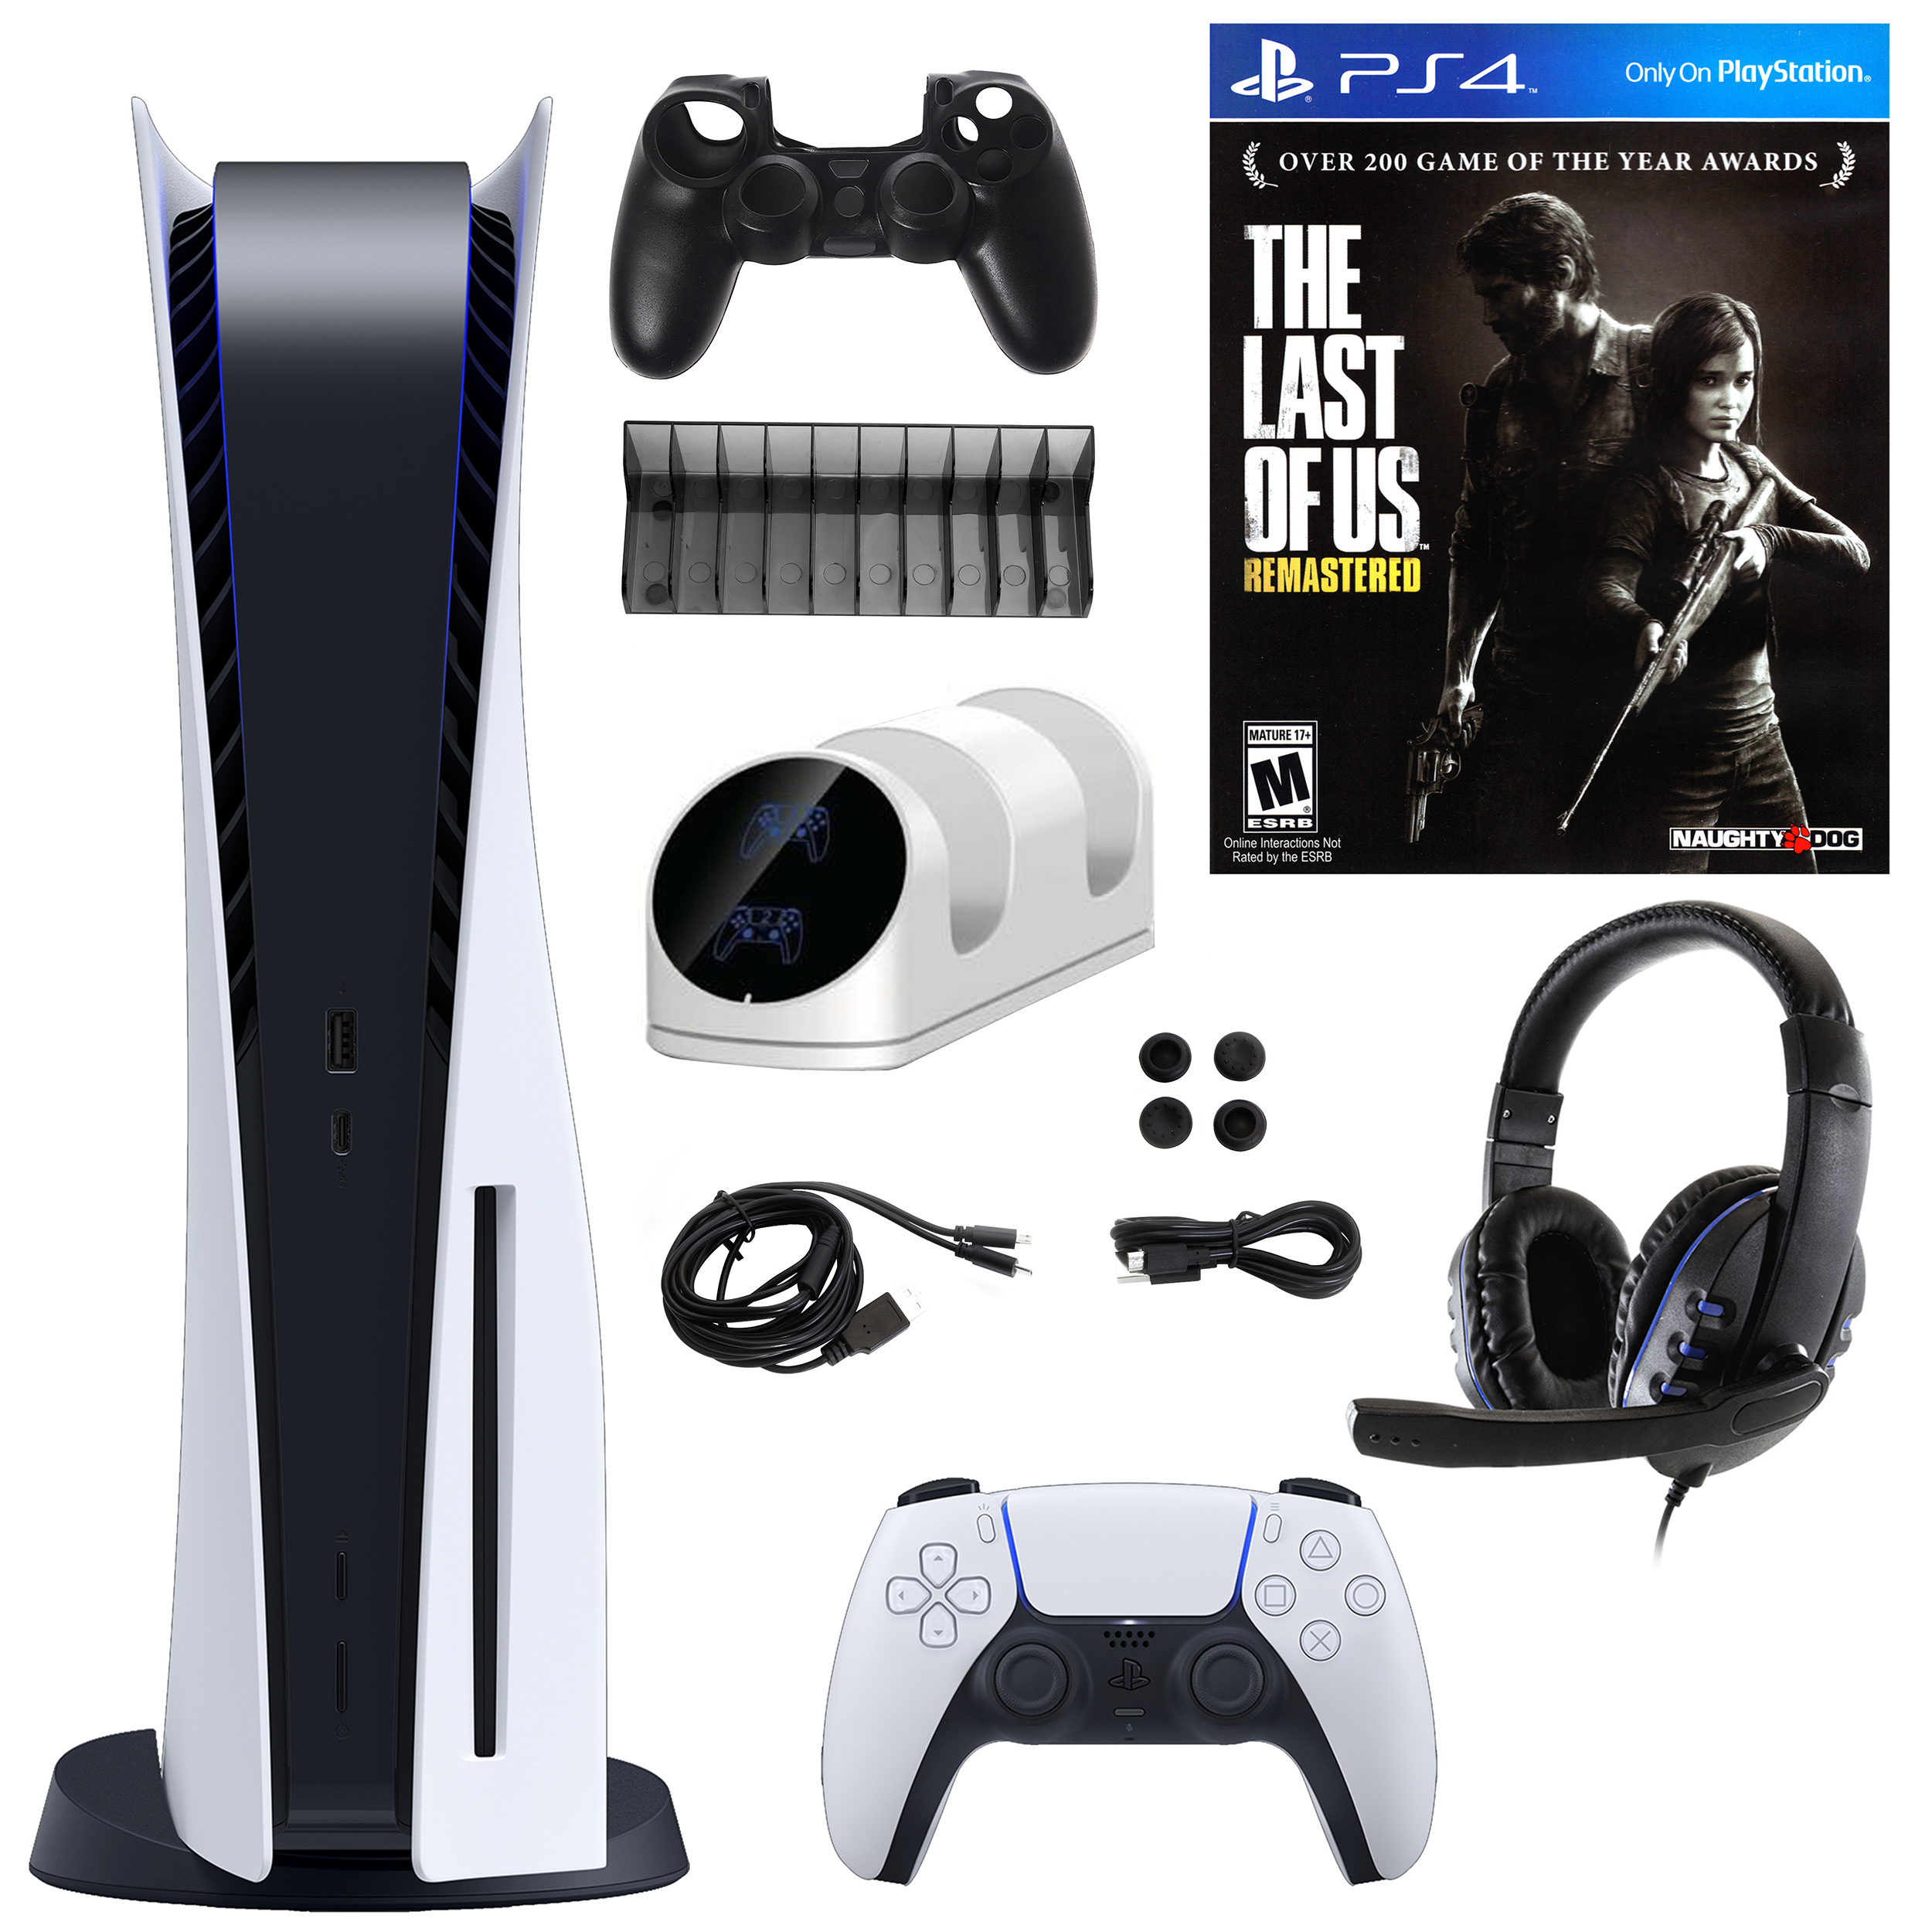 Sony PlayStation 5 with The Last of Us and Accessories Kit